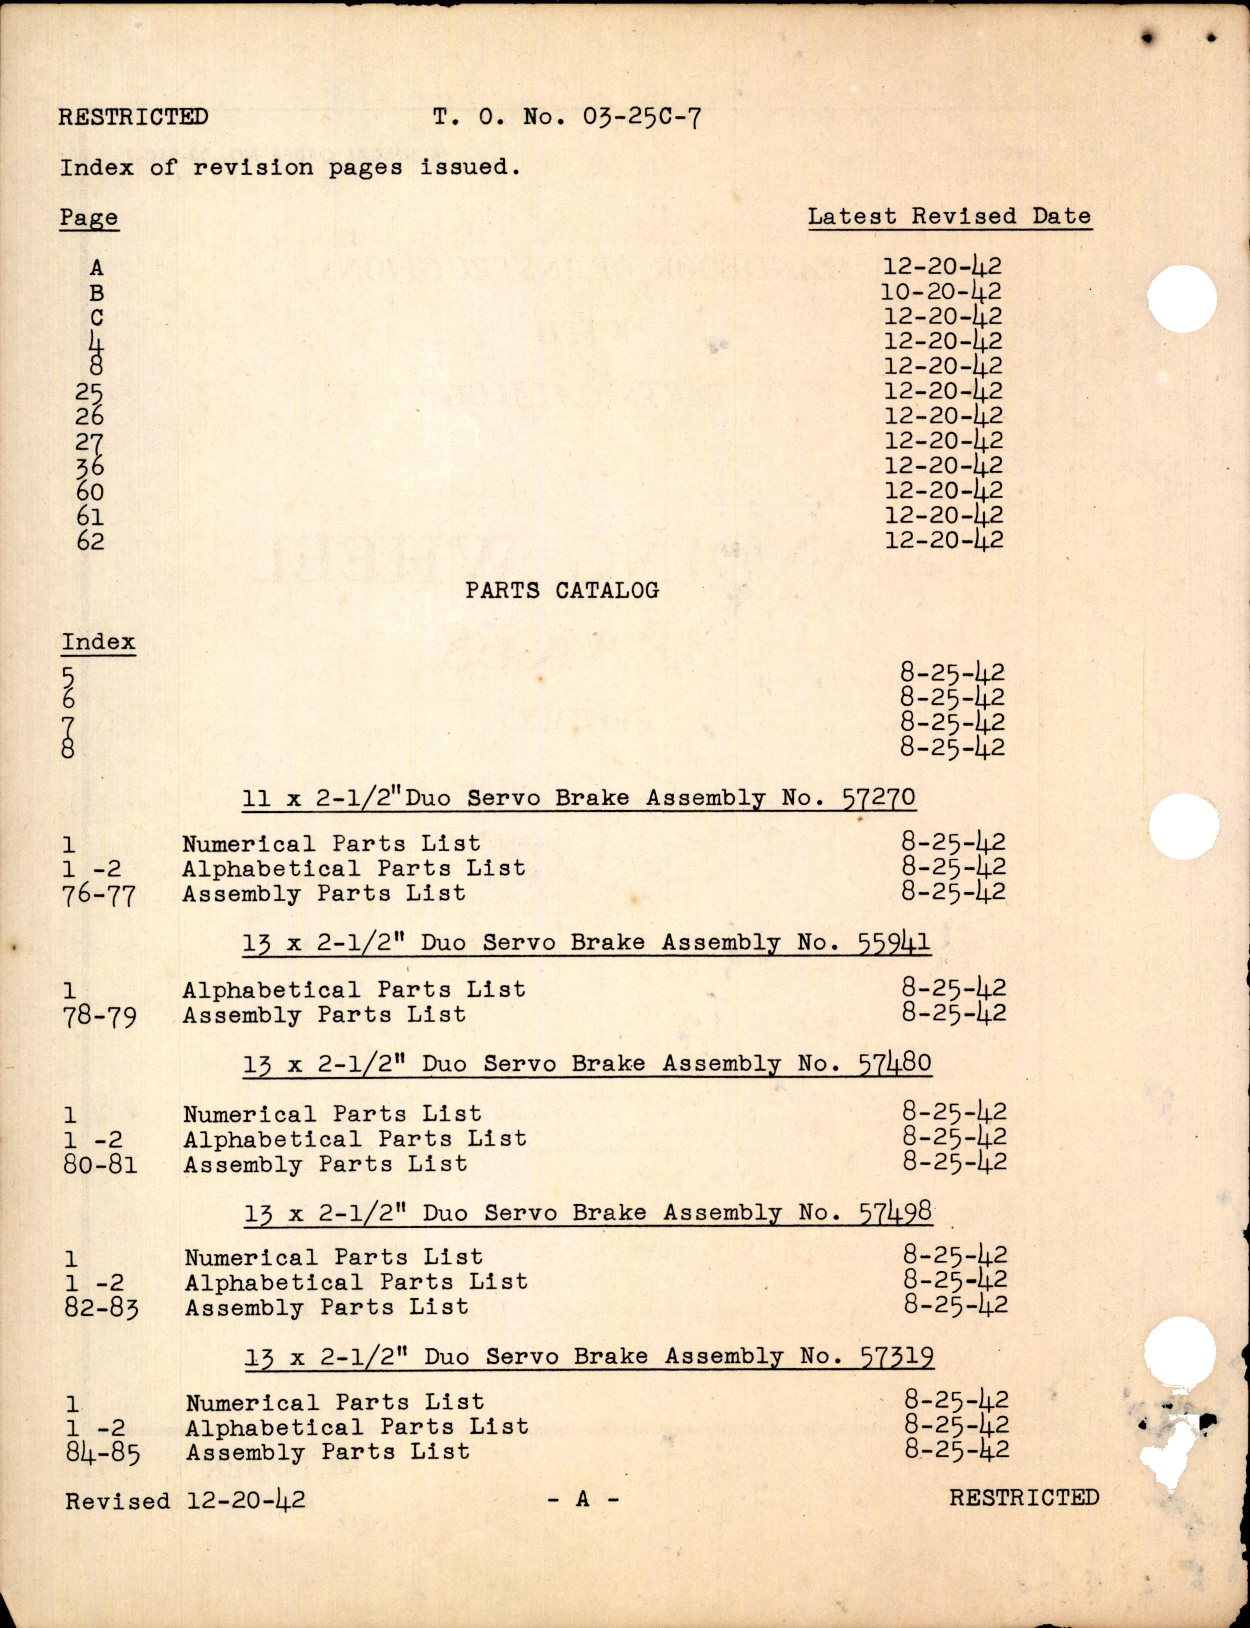 Sample page 4 from AirCorps Library document: Instructions with Parts Catalog for Landing Wheel Brakes